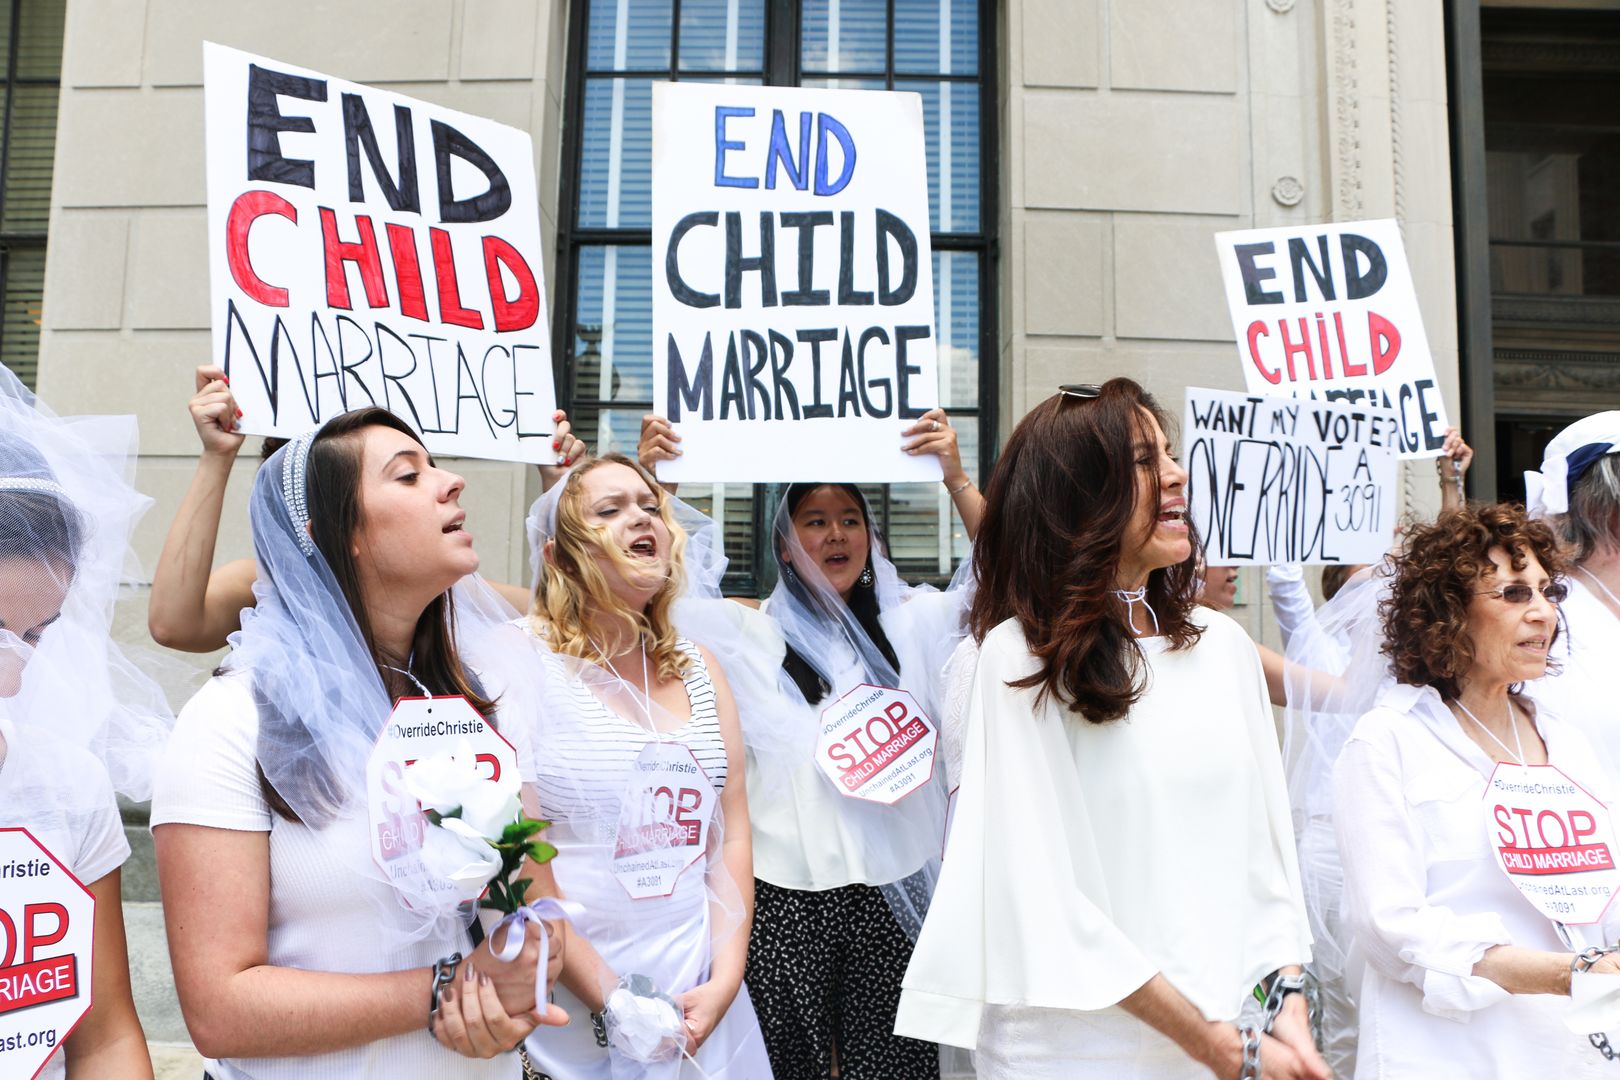 Protest in support of ending child marriage